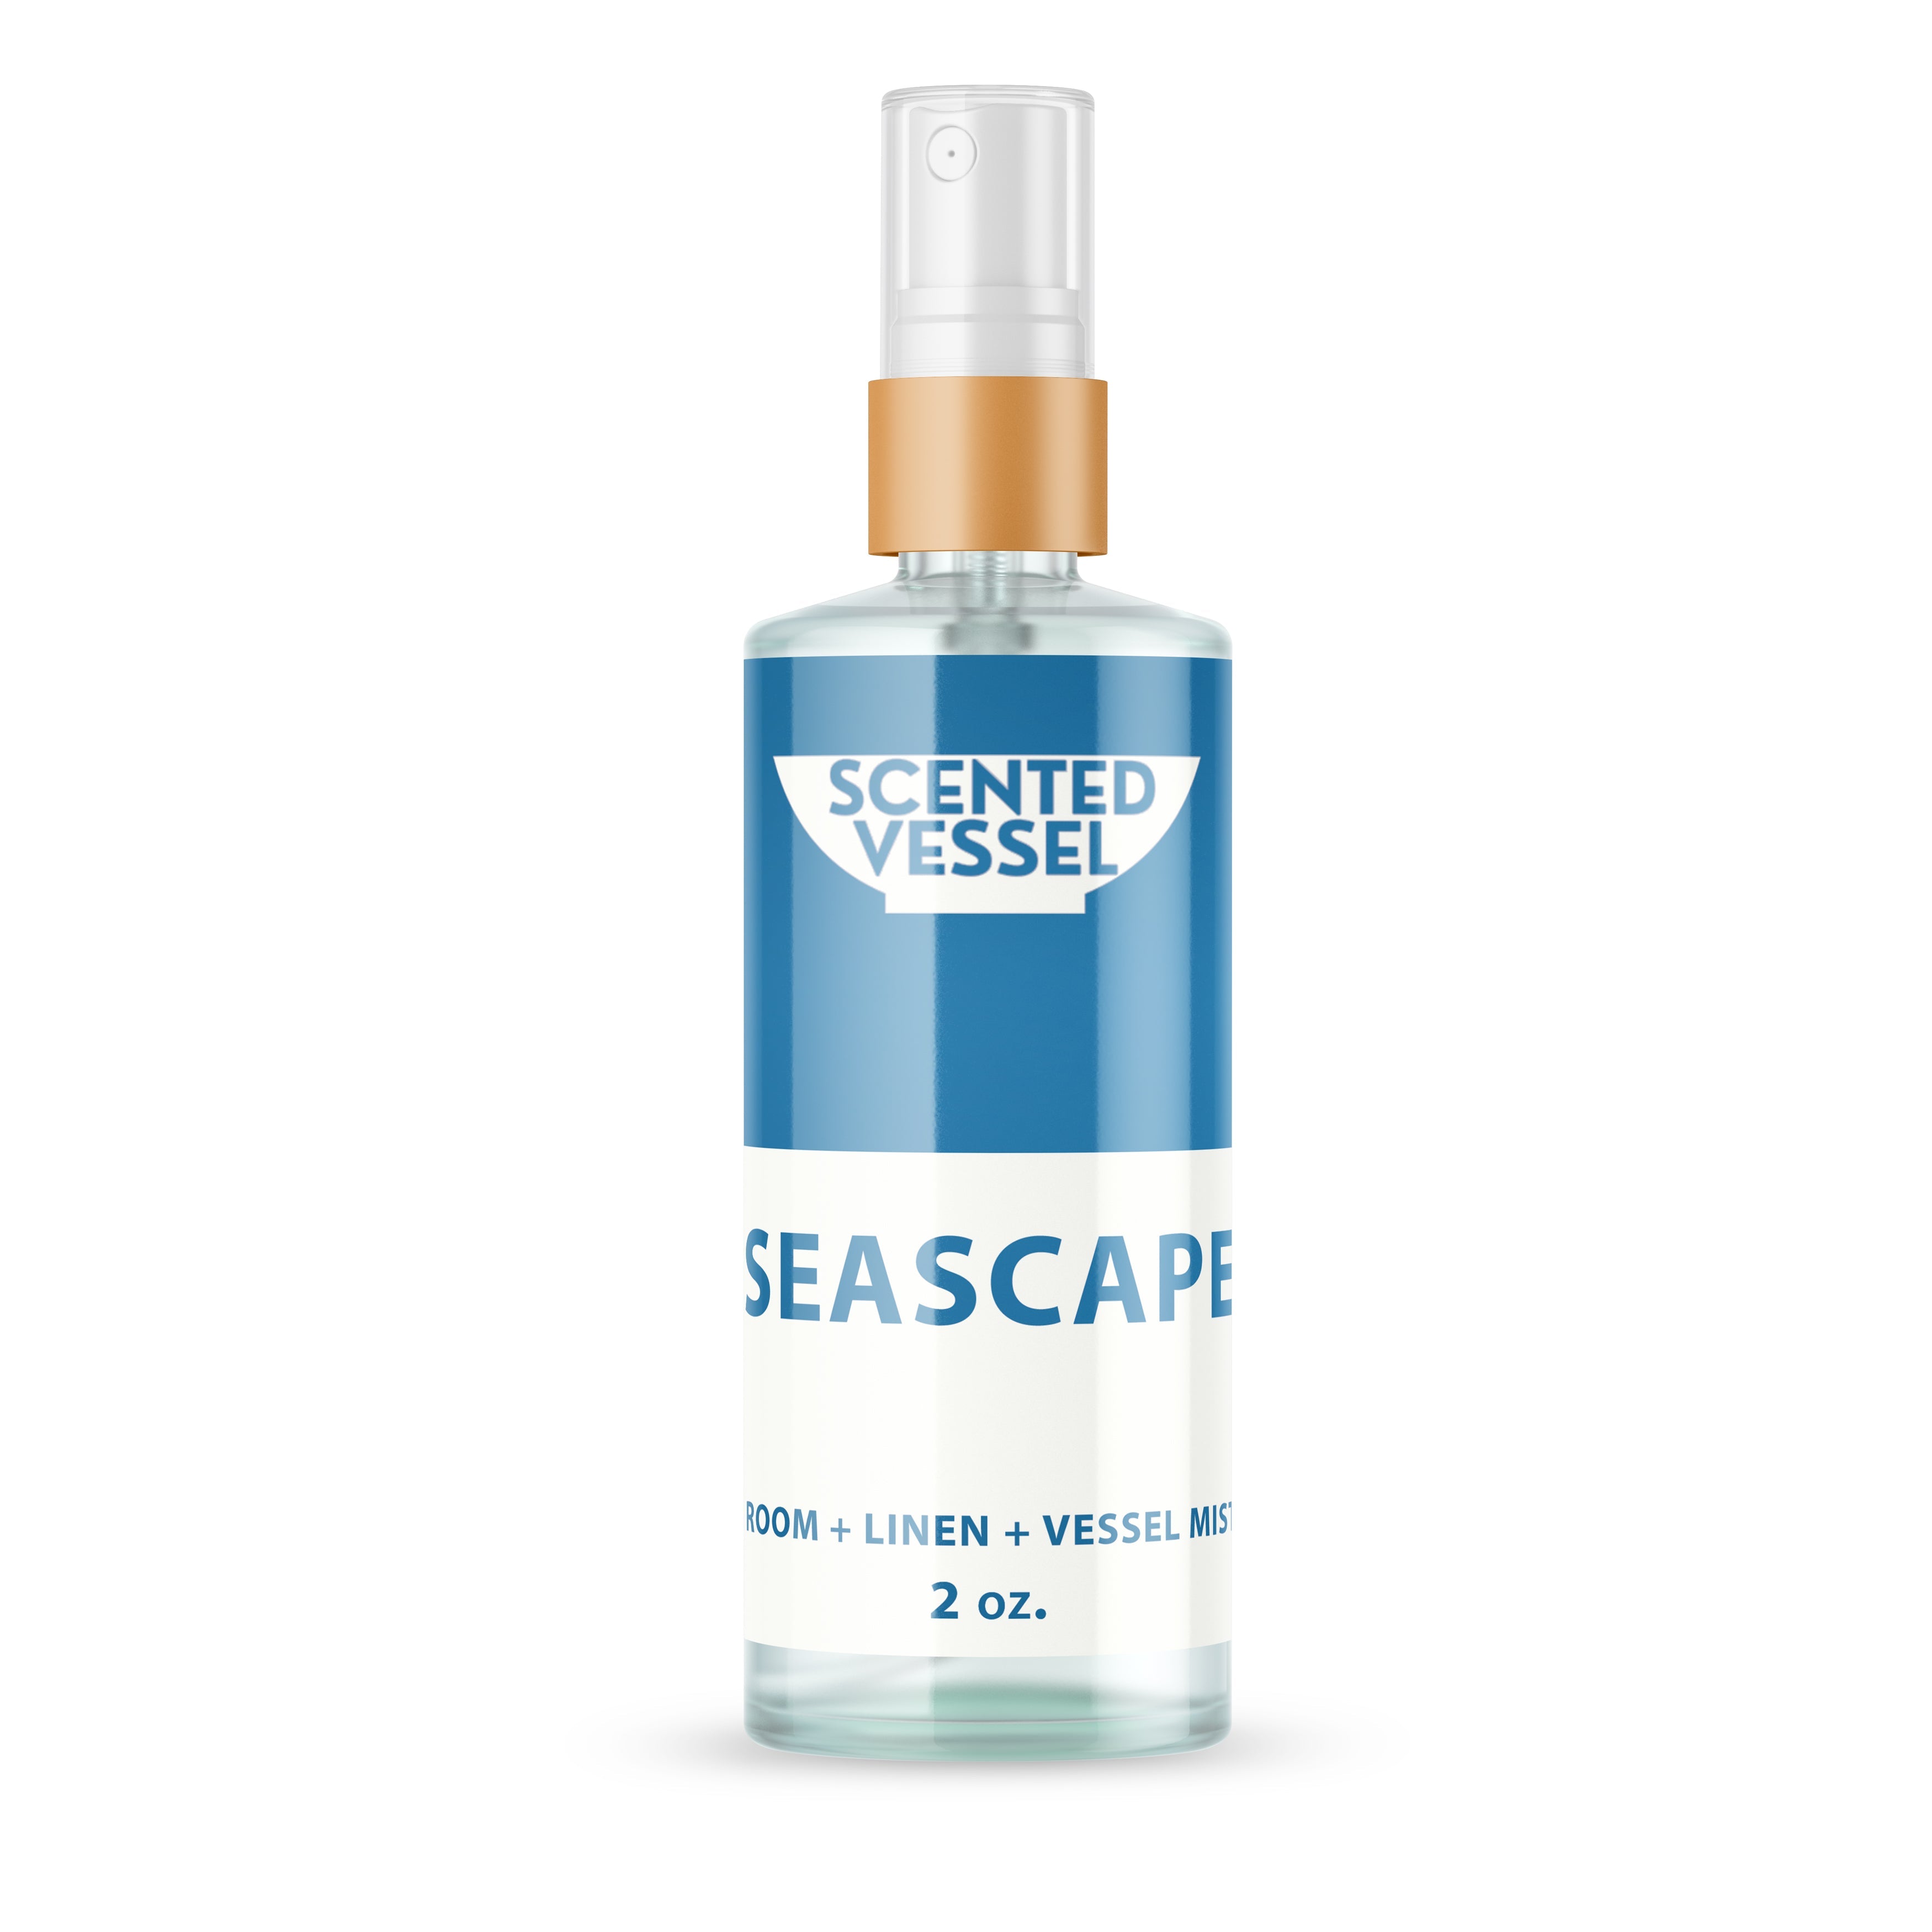 Seascape 2oz Fragrance Mist by Scented Vessel